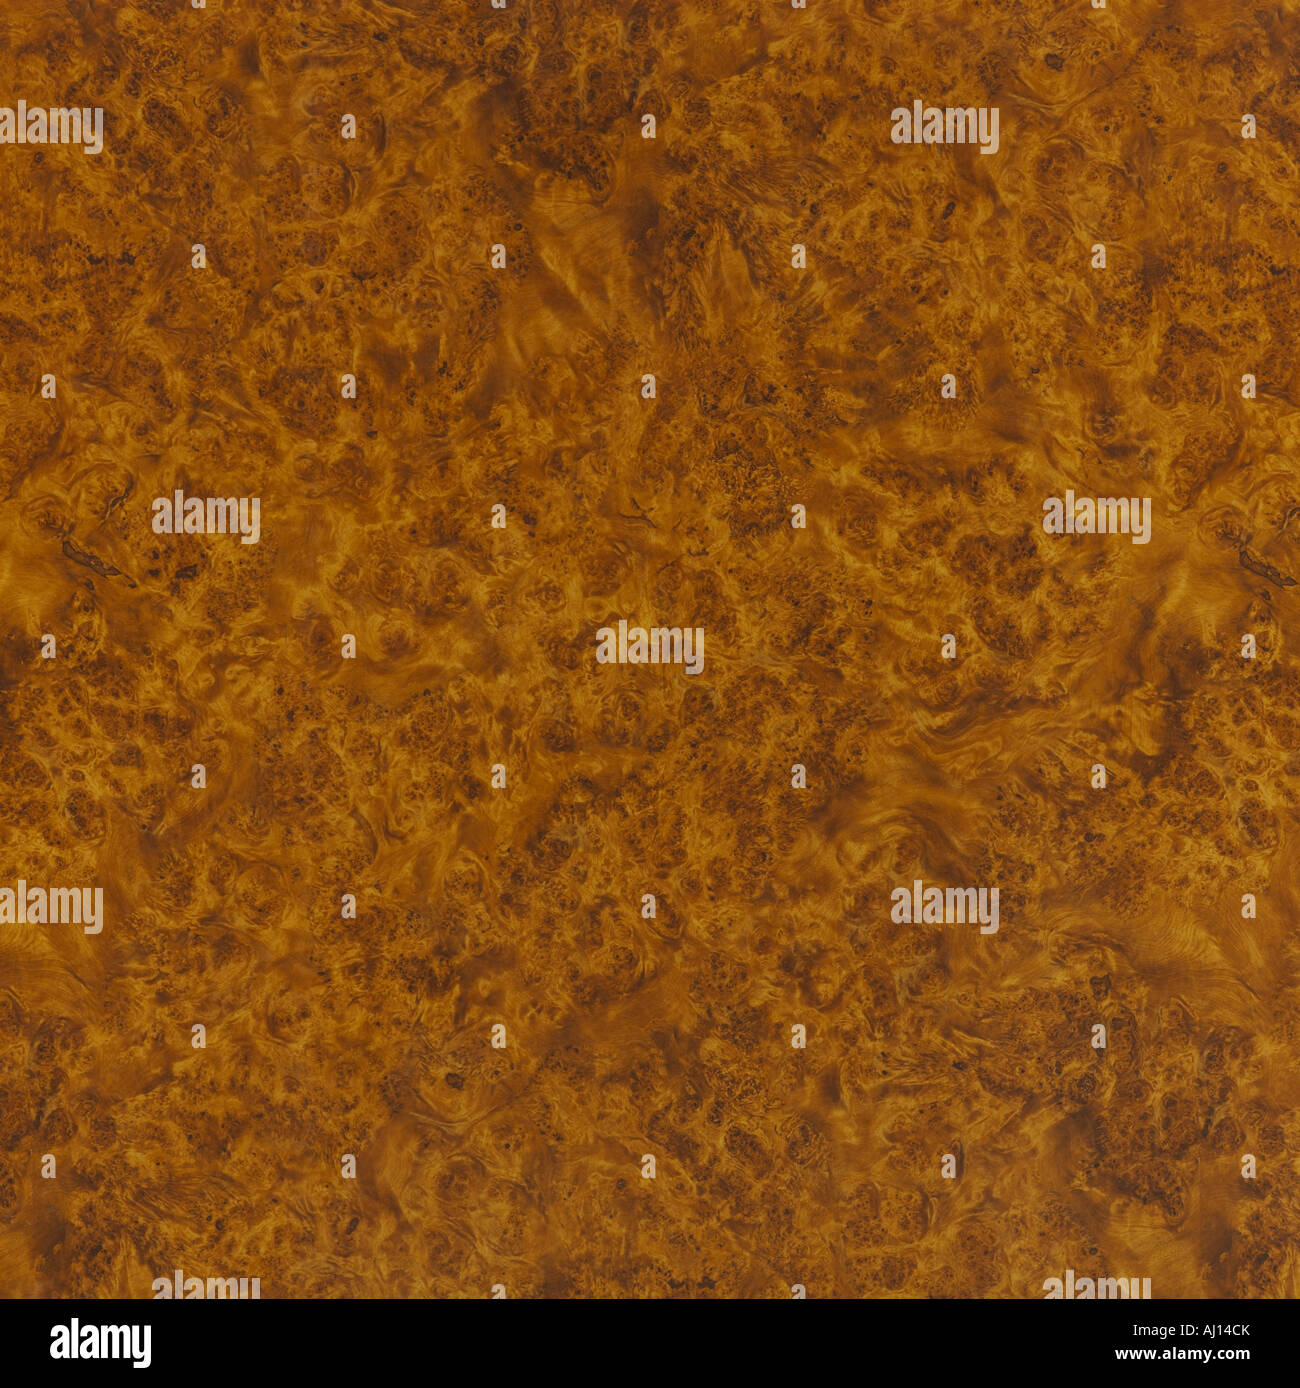 ABSTRACT BROWN MARBLE SWIRL PATTERN BACKGROUND Stock Photo